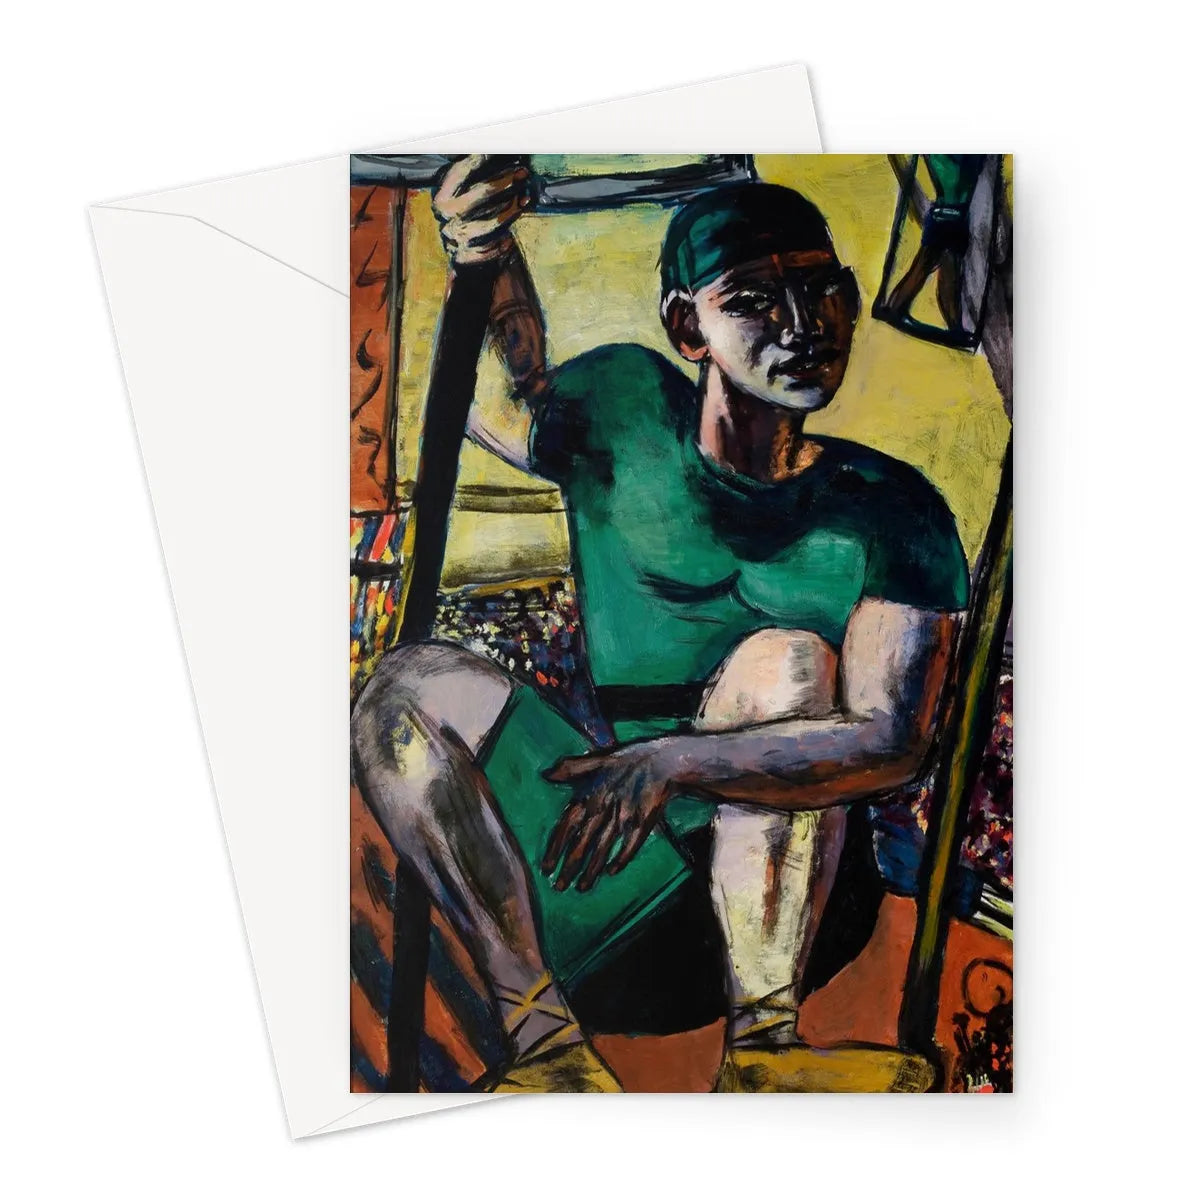 Acrobat On The Trapeze - Max Beckmann Greeting Card - A5 Portrait / 1 Card - Greeting & Note Cards - Aesthetic Art